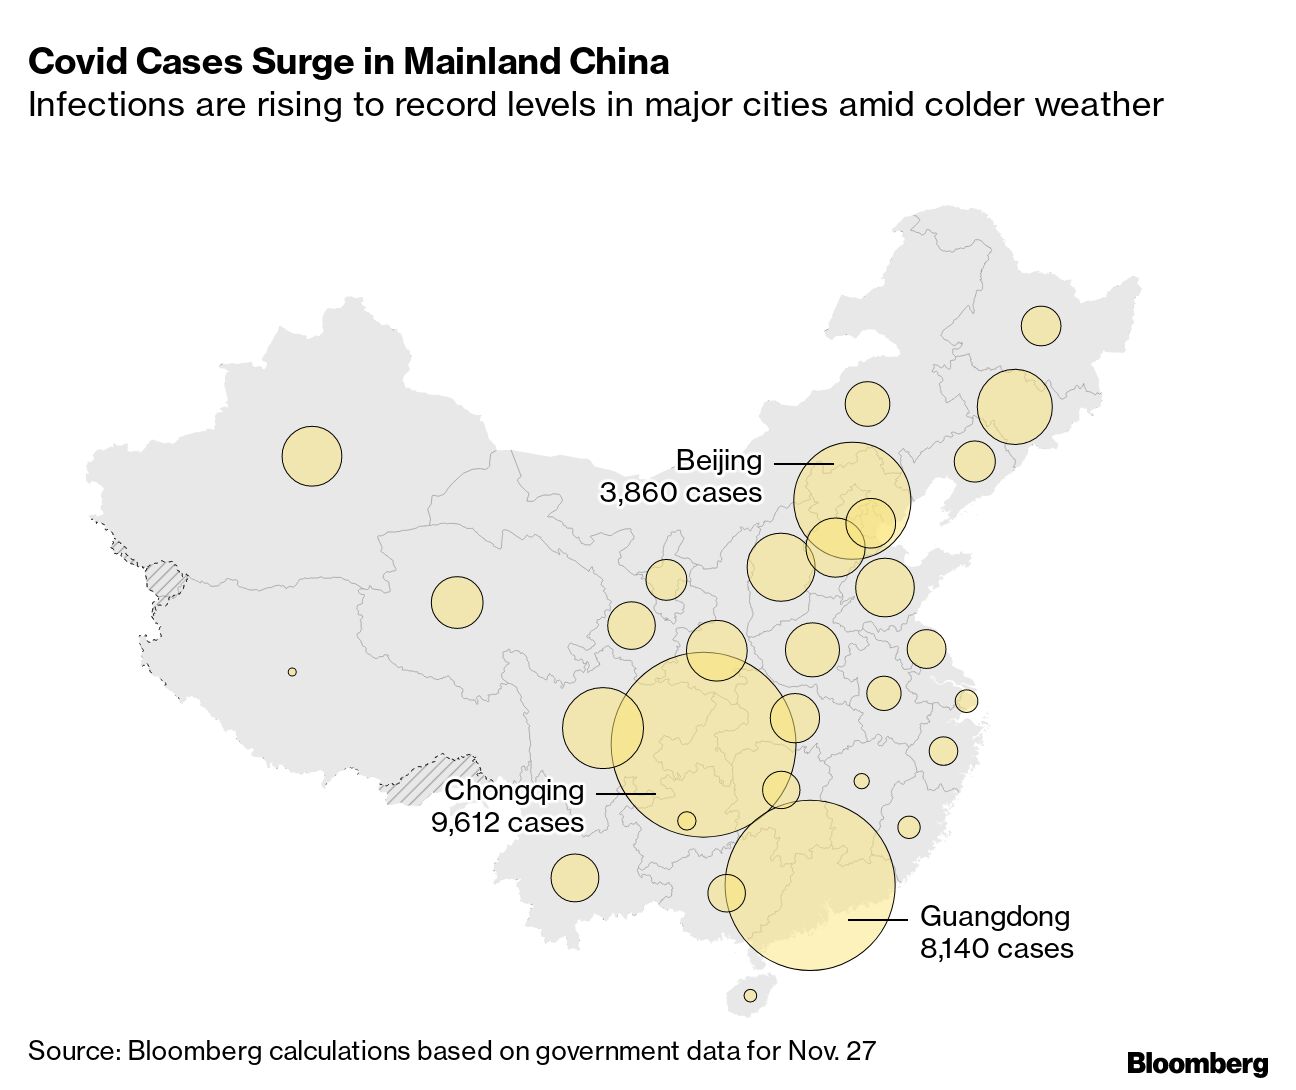 Covid Cases Surge in Mainland China | Infections are rising to record levels in major cities amid colder weather